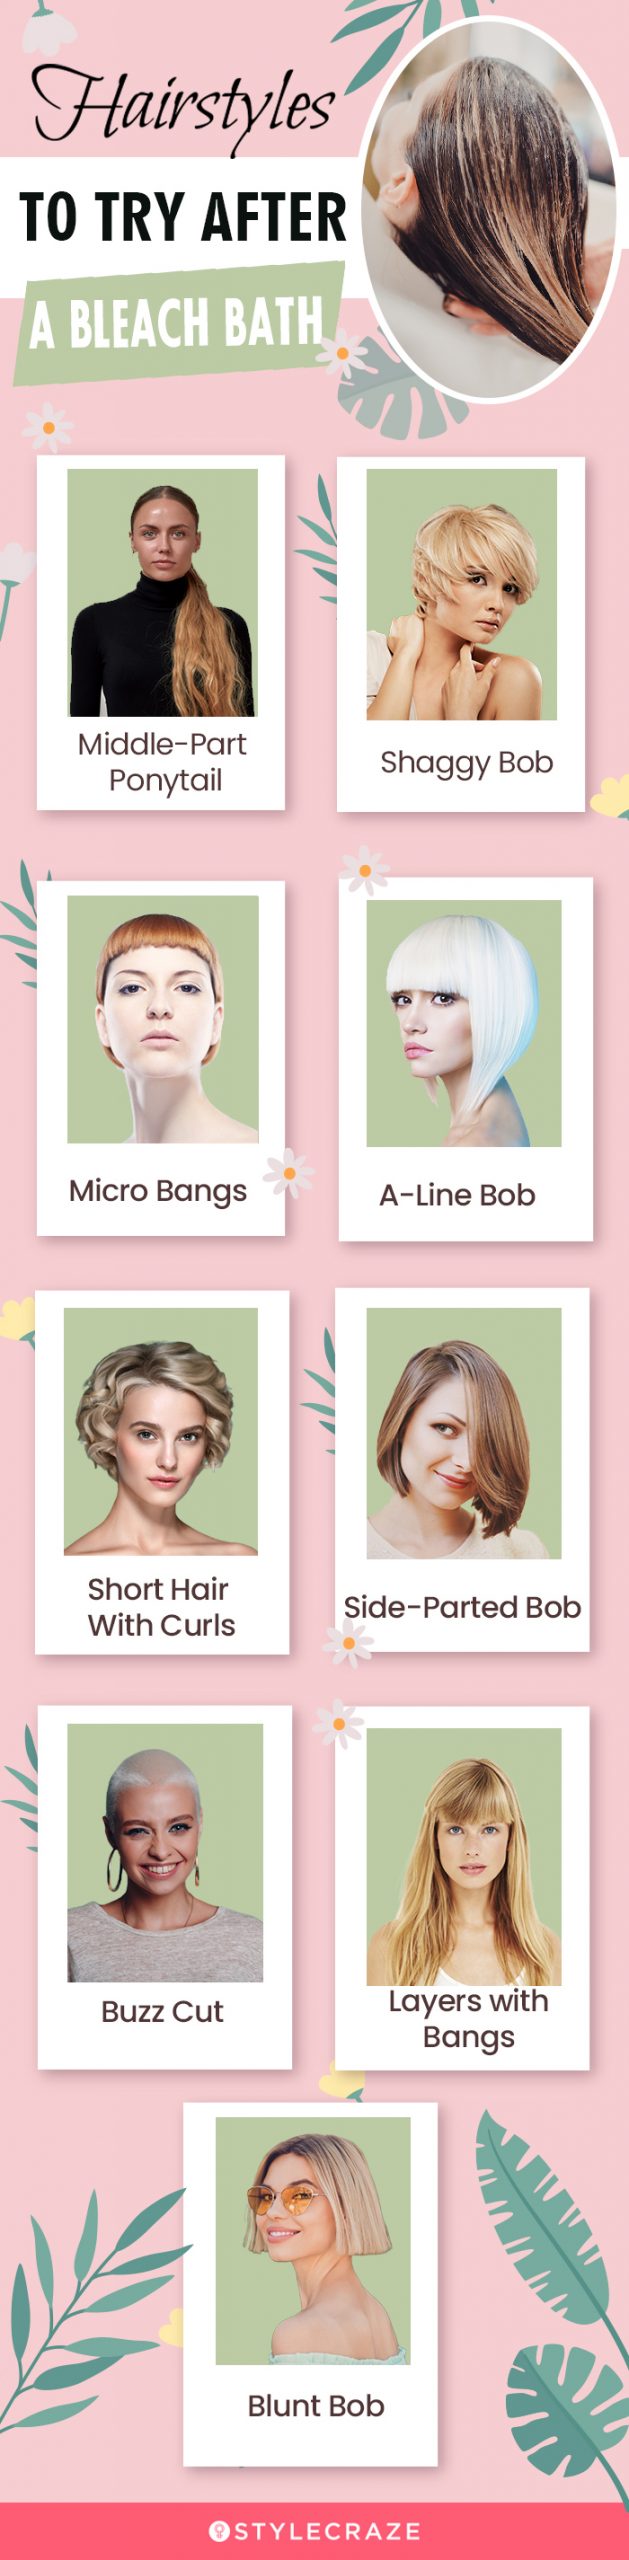 hairstyles to try after a bleach bath (infographic)